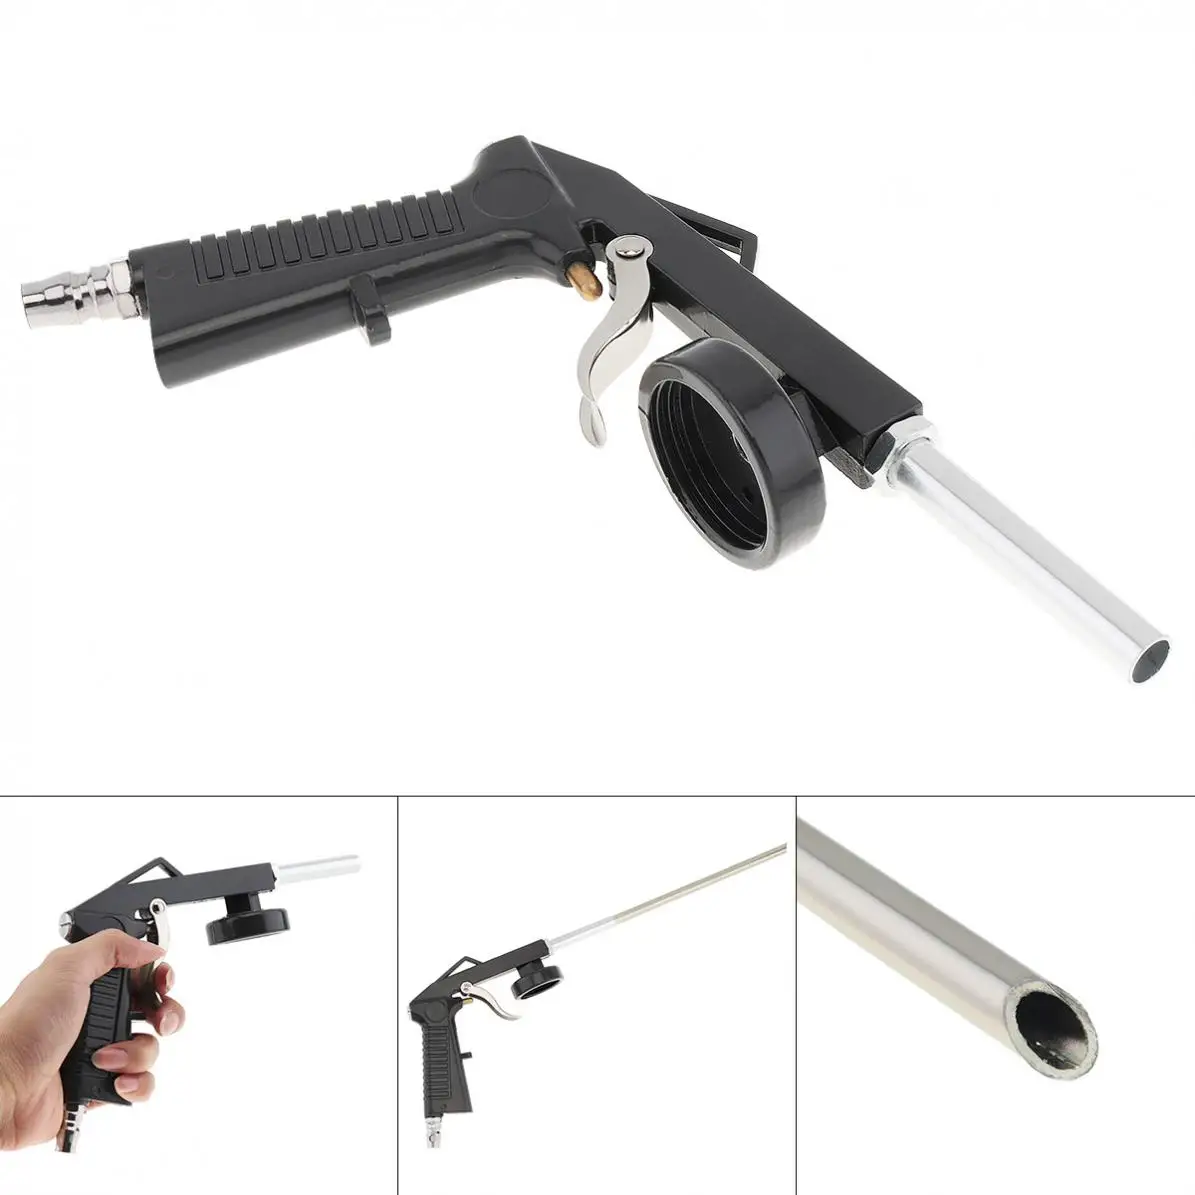 

Universal Gray Car Chassis Armor Special Pneumatic Spray Gun Varnish Air with 7.5mm Inlet Port for Automotive Chassis Spraying